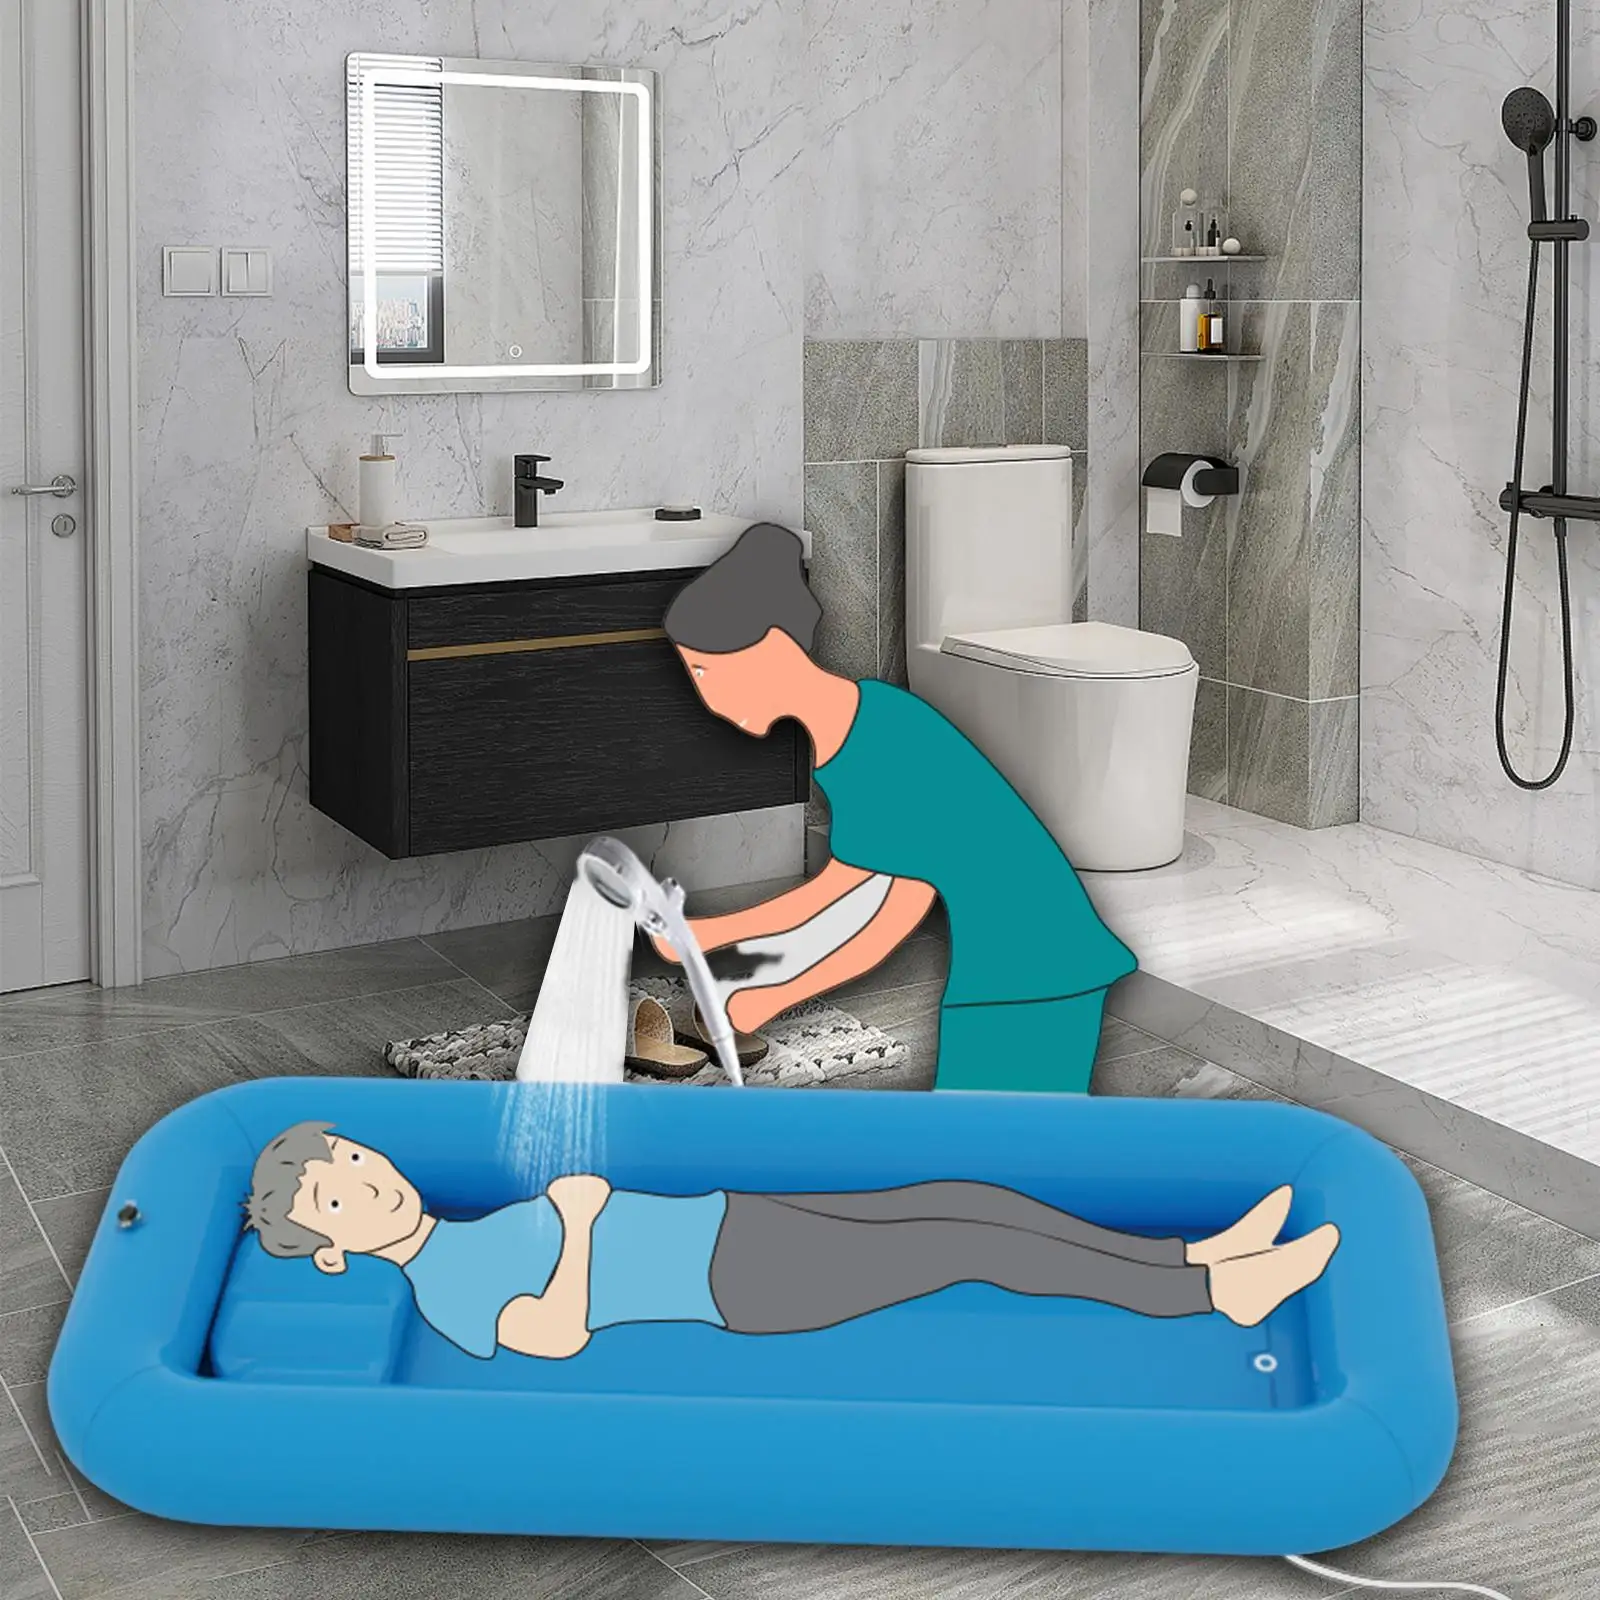 Adults Inflatable Bathtub Foldable Bath Tub Bath Kit with Pillow Bath Basin for Caregivers Better Bathing Experience Bath in Bed